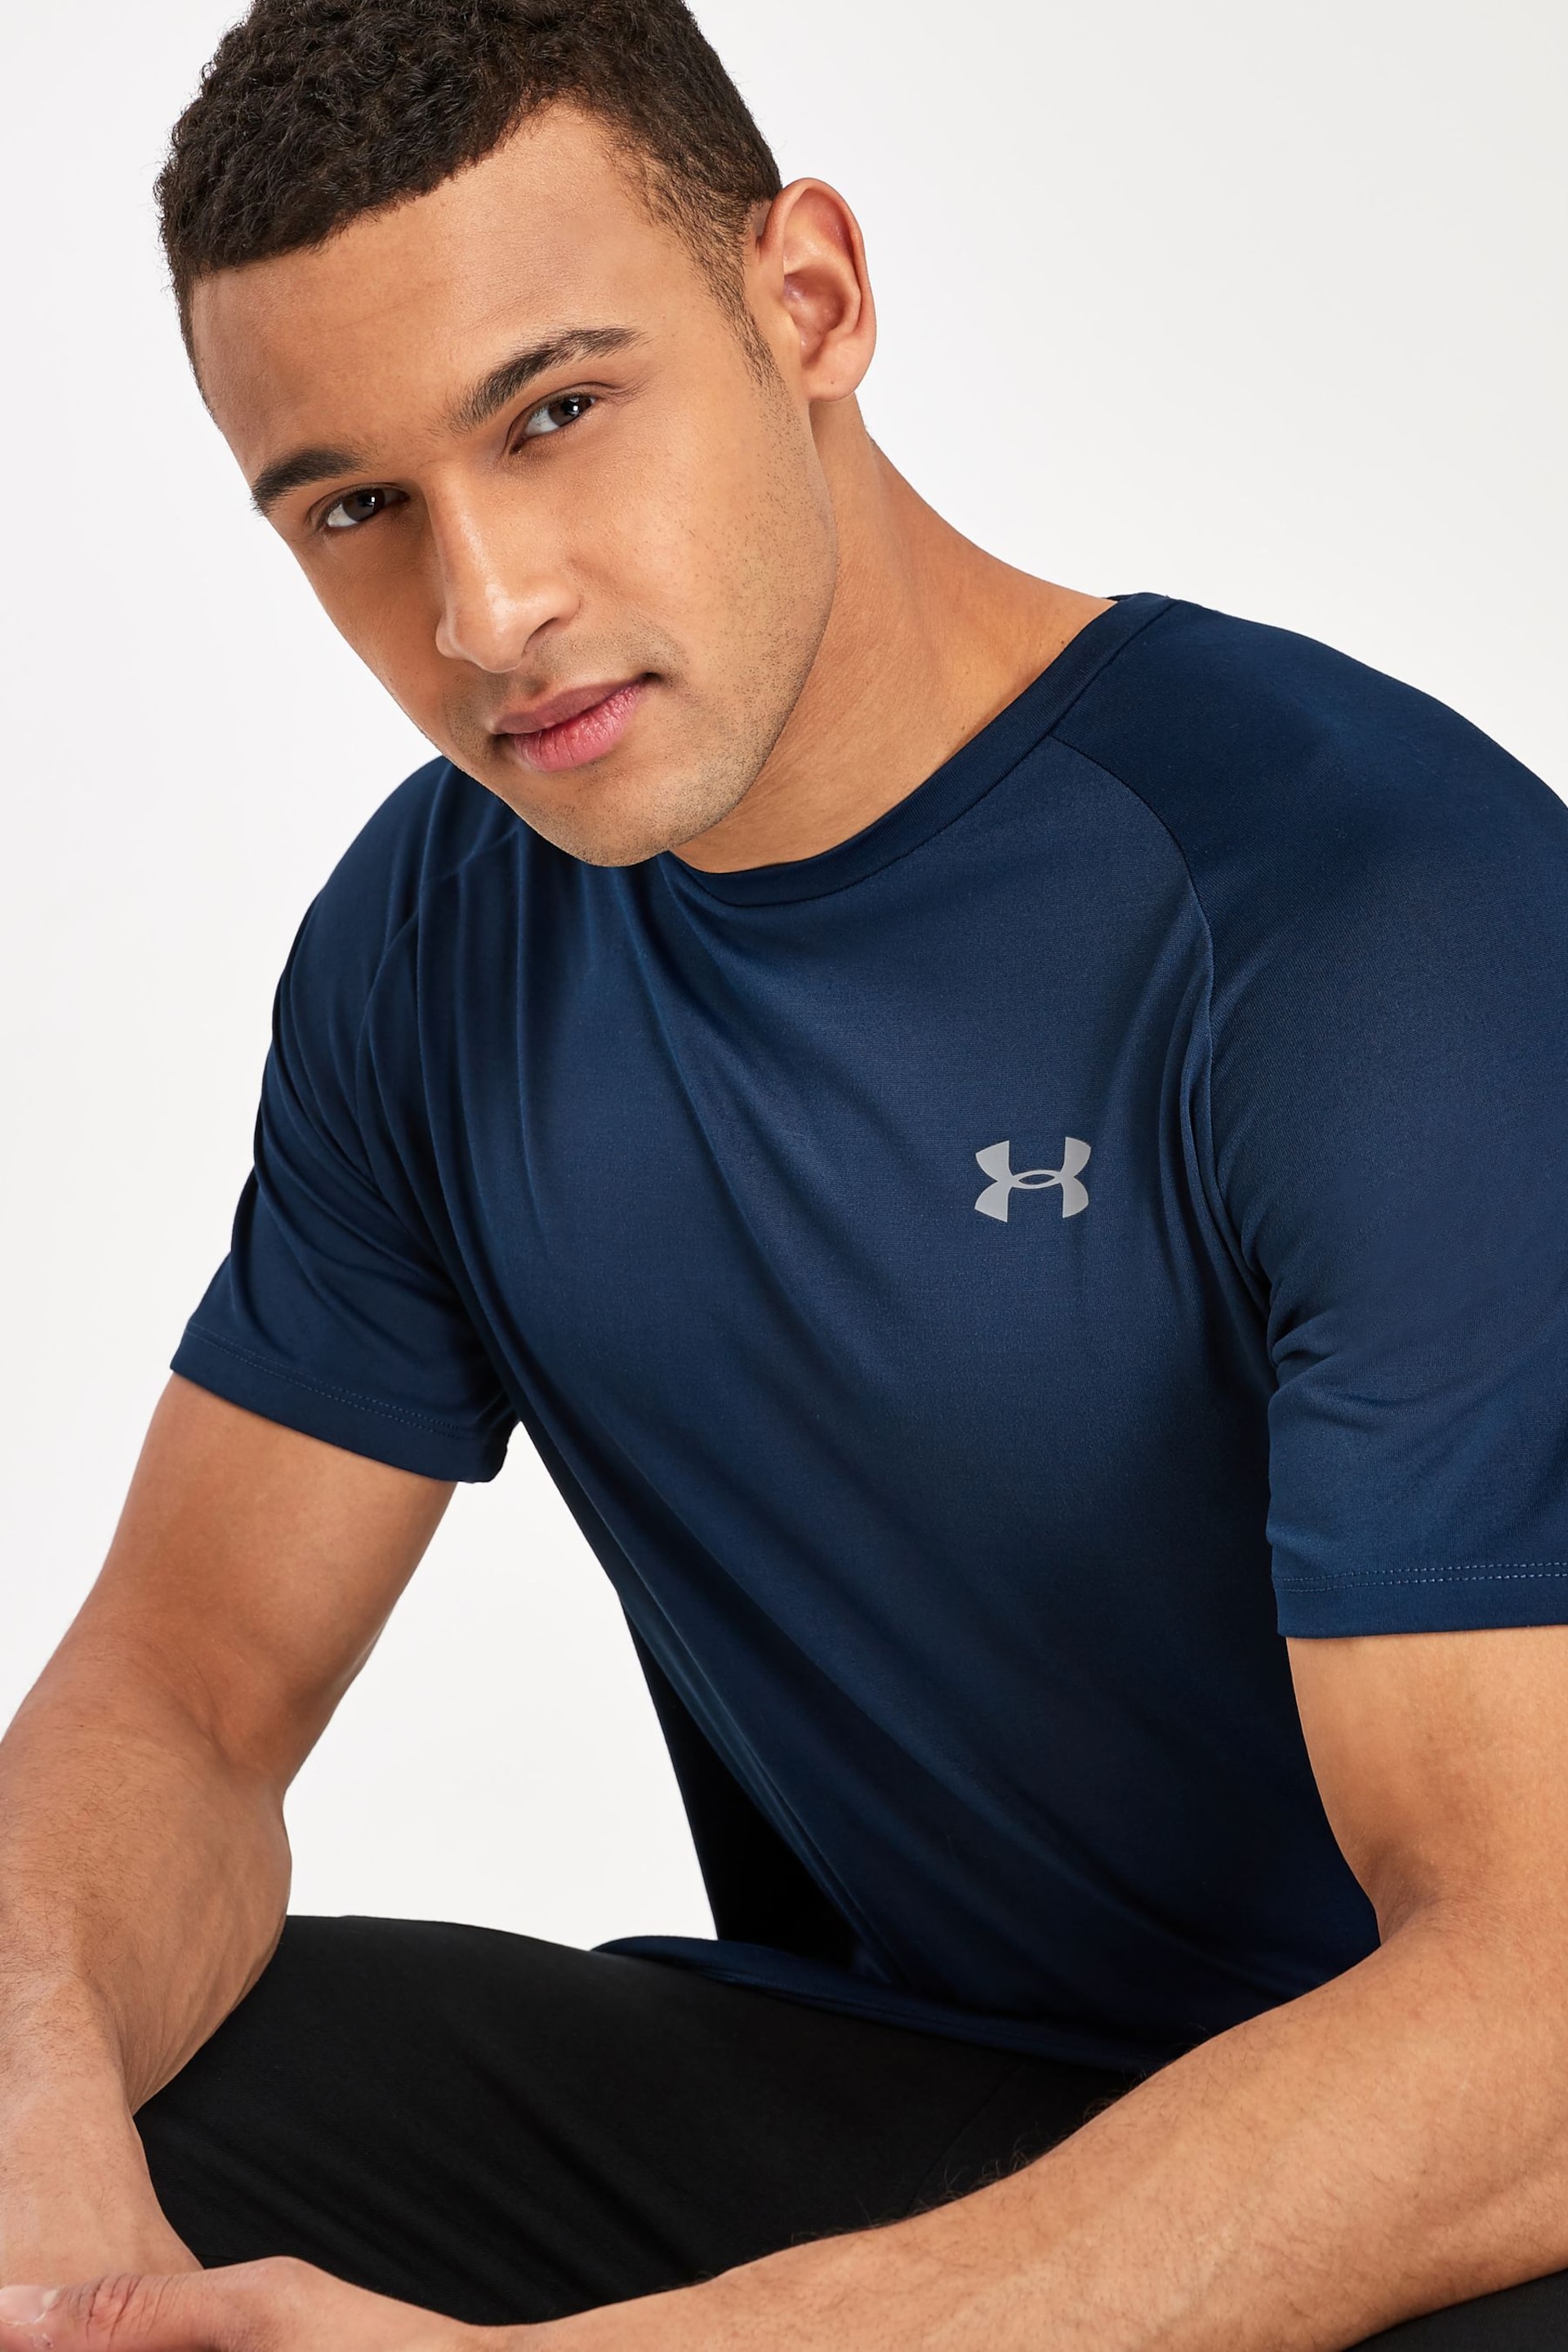 Under Armour Navy Tech 2 T-Shirt - Image 3 of 4